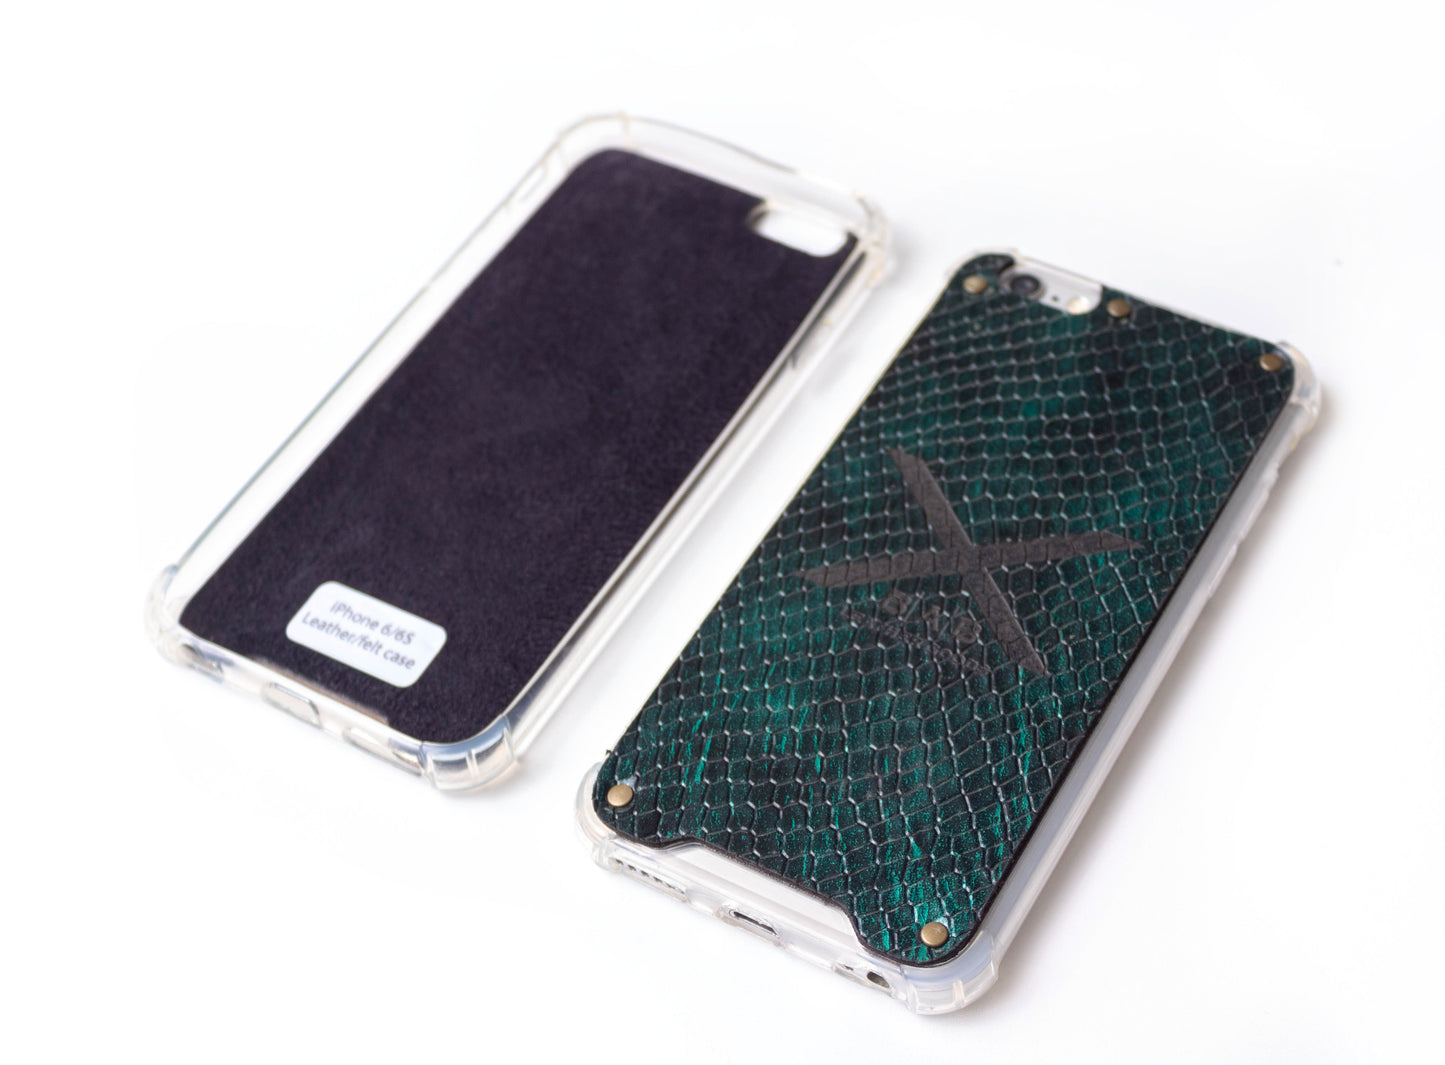 Textured Green Python Patent Genuine Leather iPhone Case cut and laser engraved, 5 Bronze Rivets.- F36